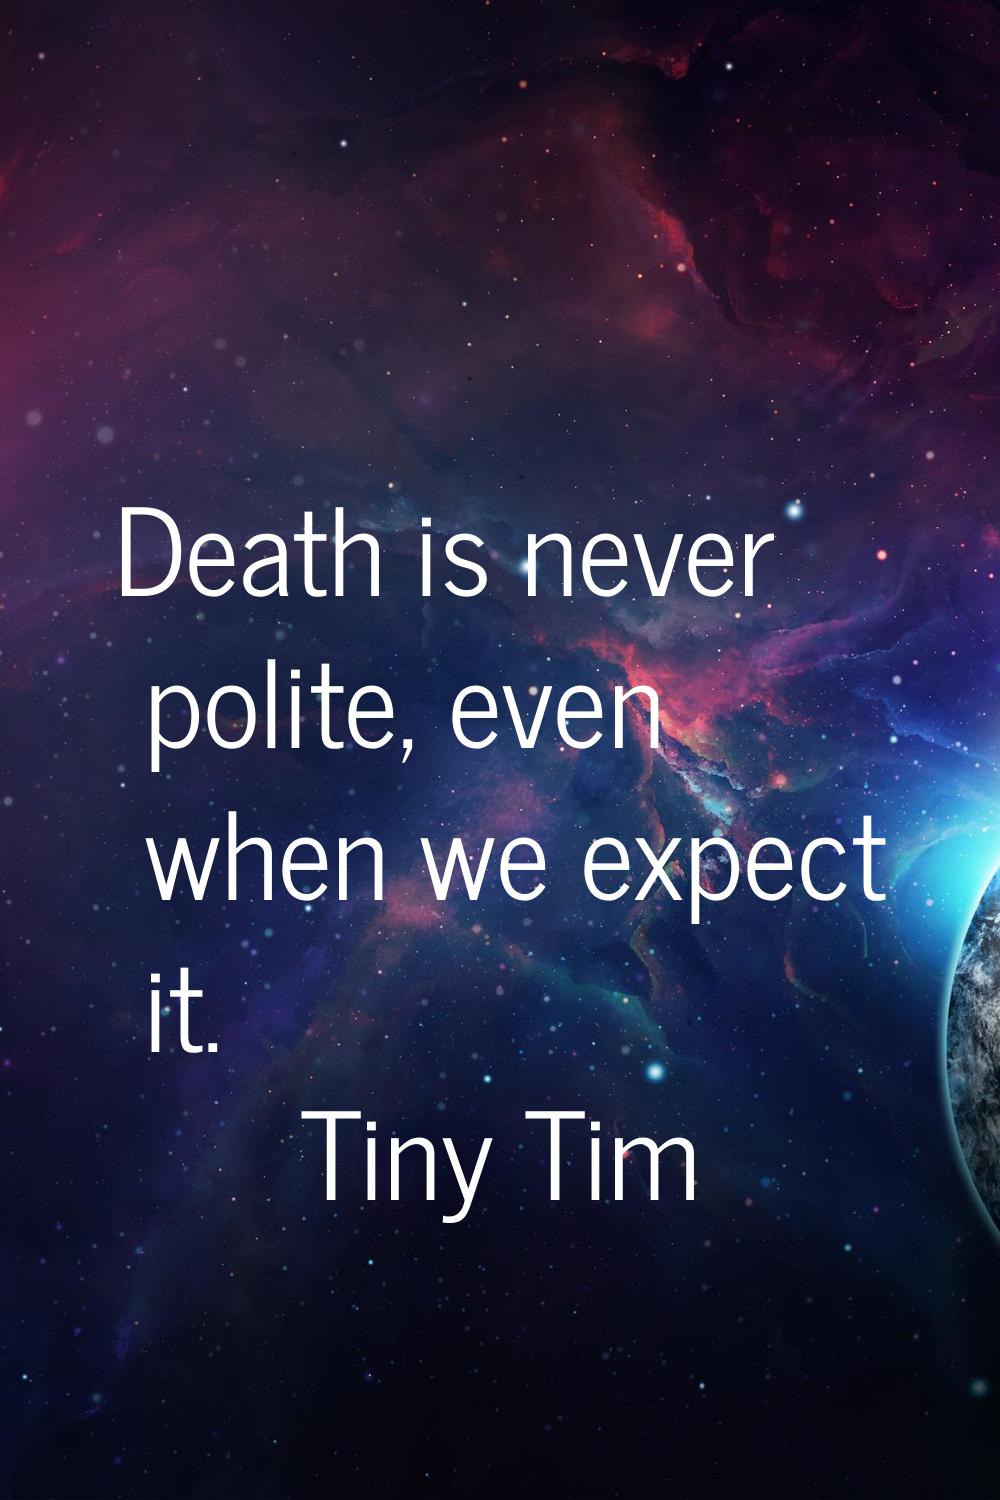 Death is never polite, even when we expect it.